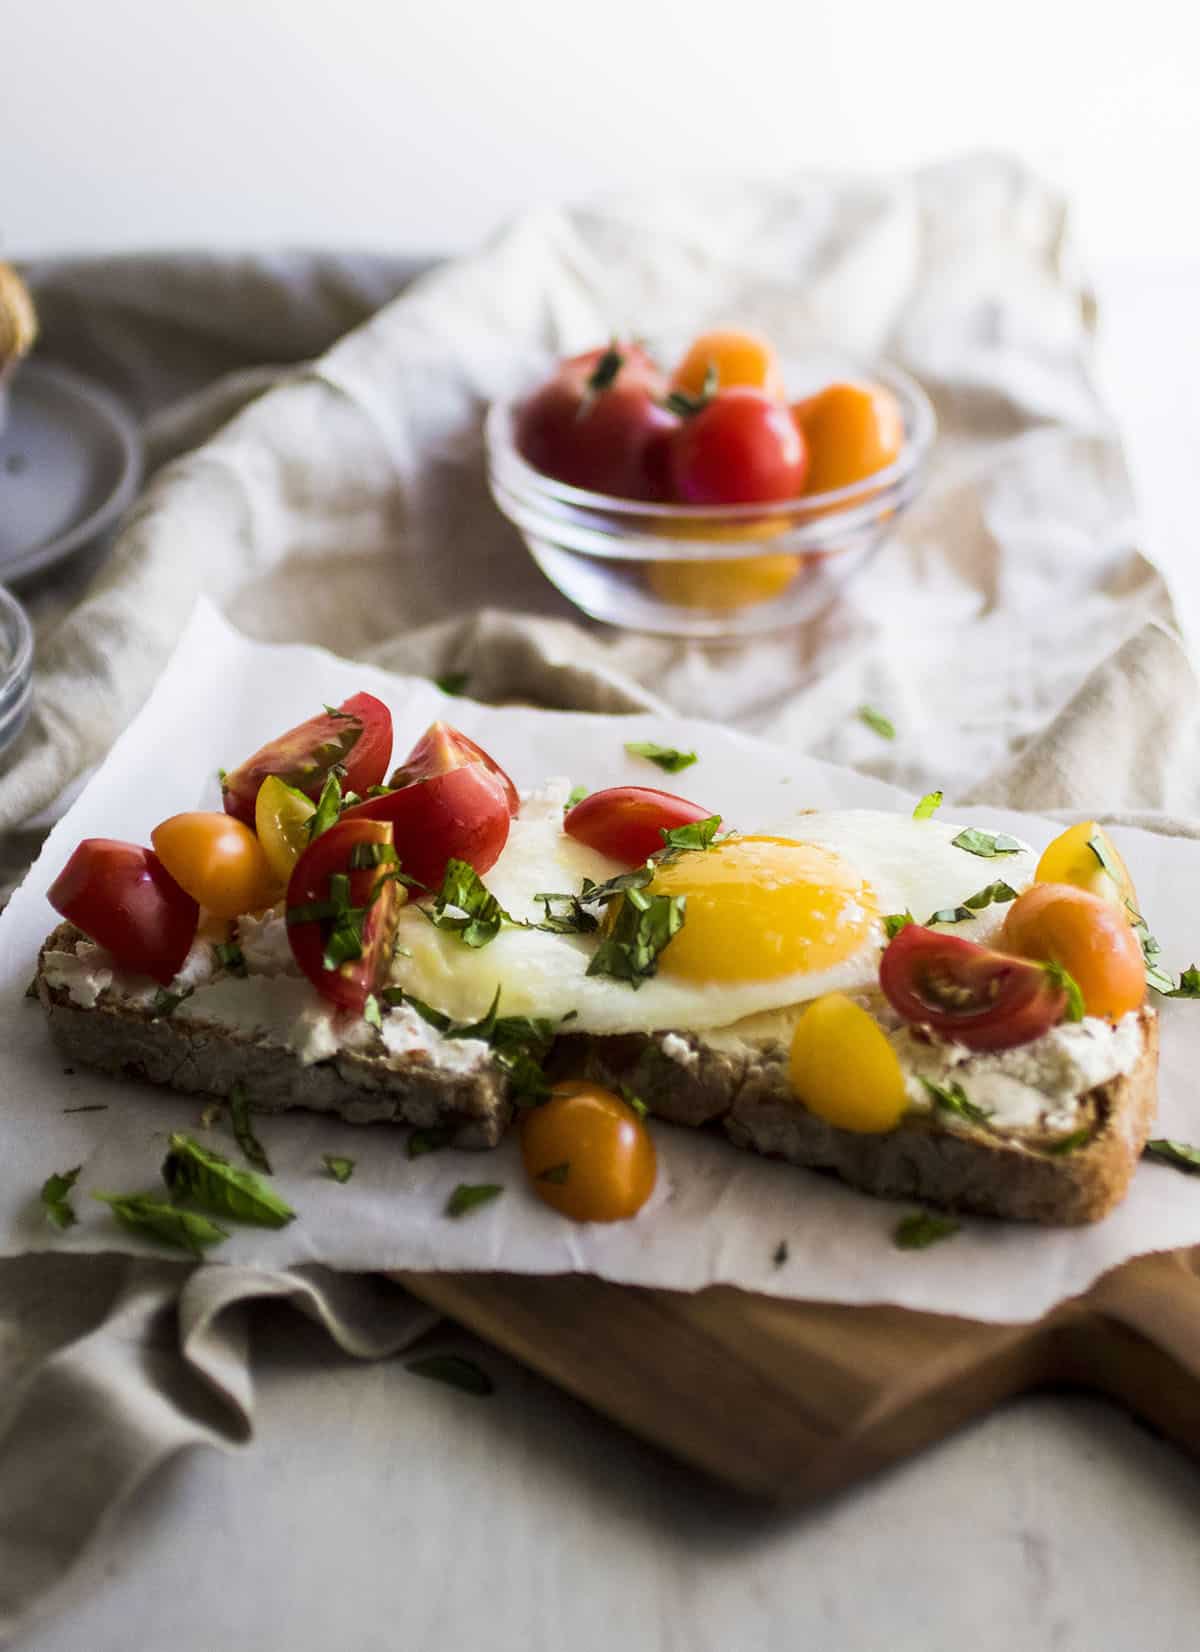 Toast topped with a sunny side up egg and fresh tomatoes.